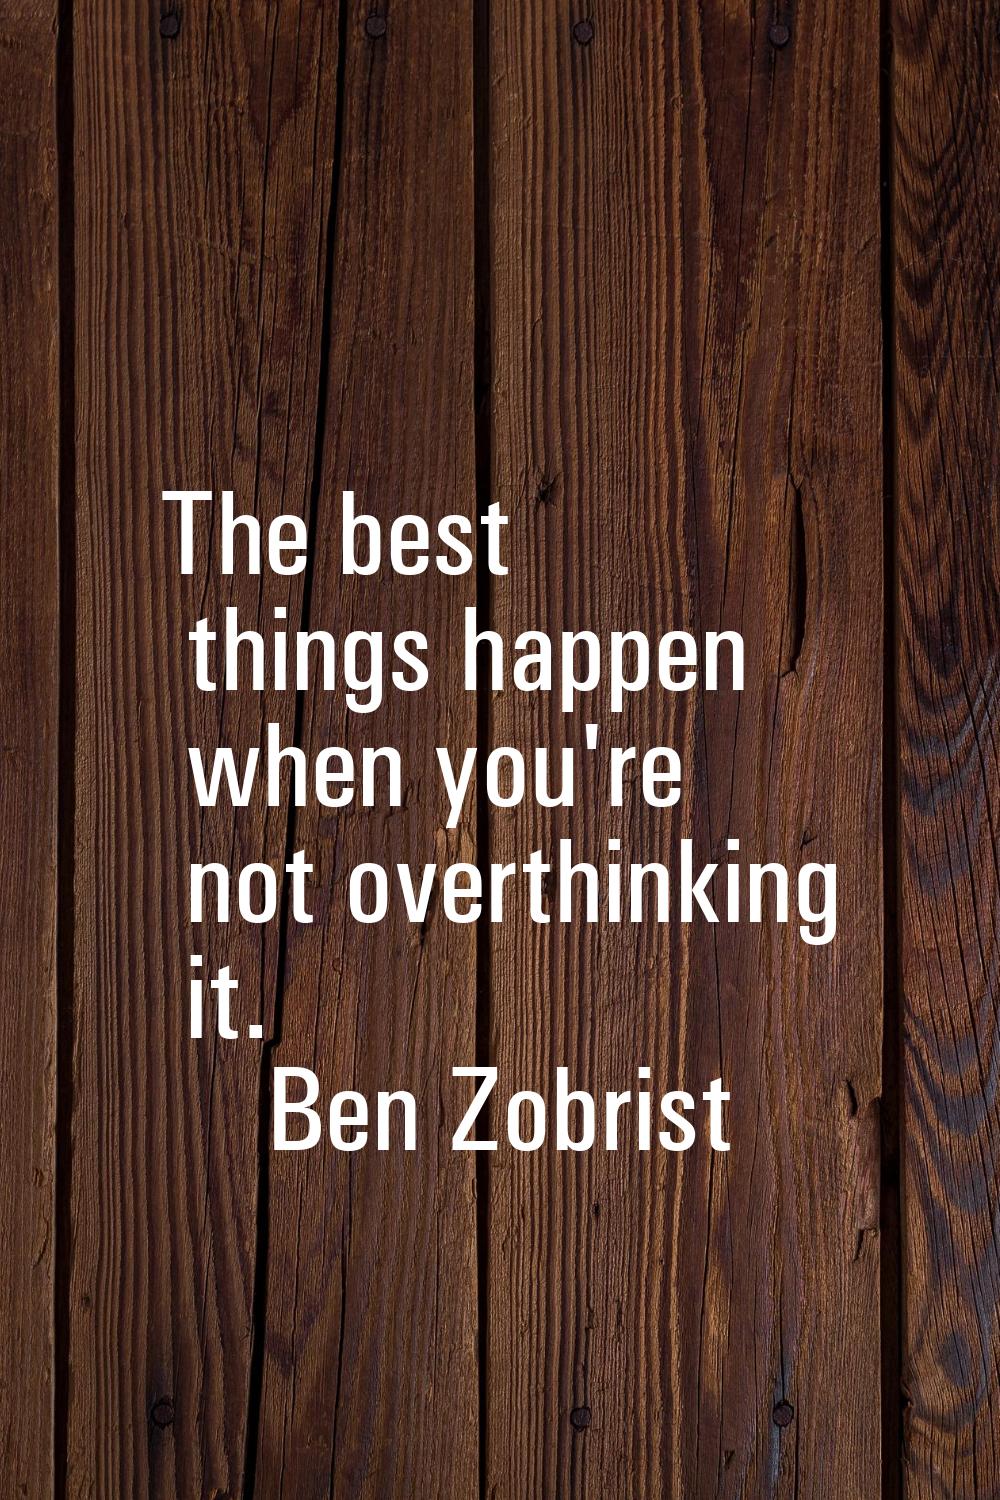 The best things happen when you're not overthinking it.